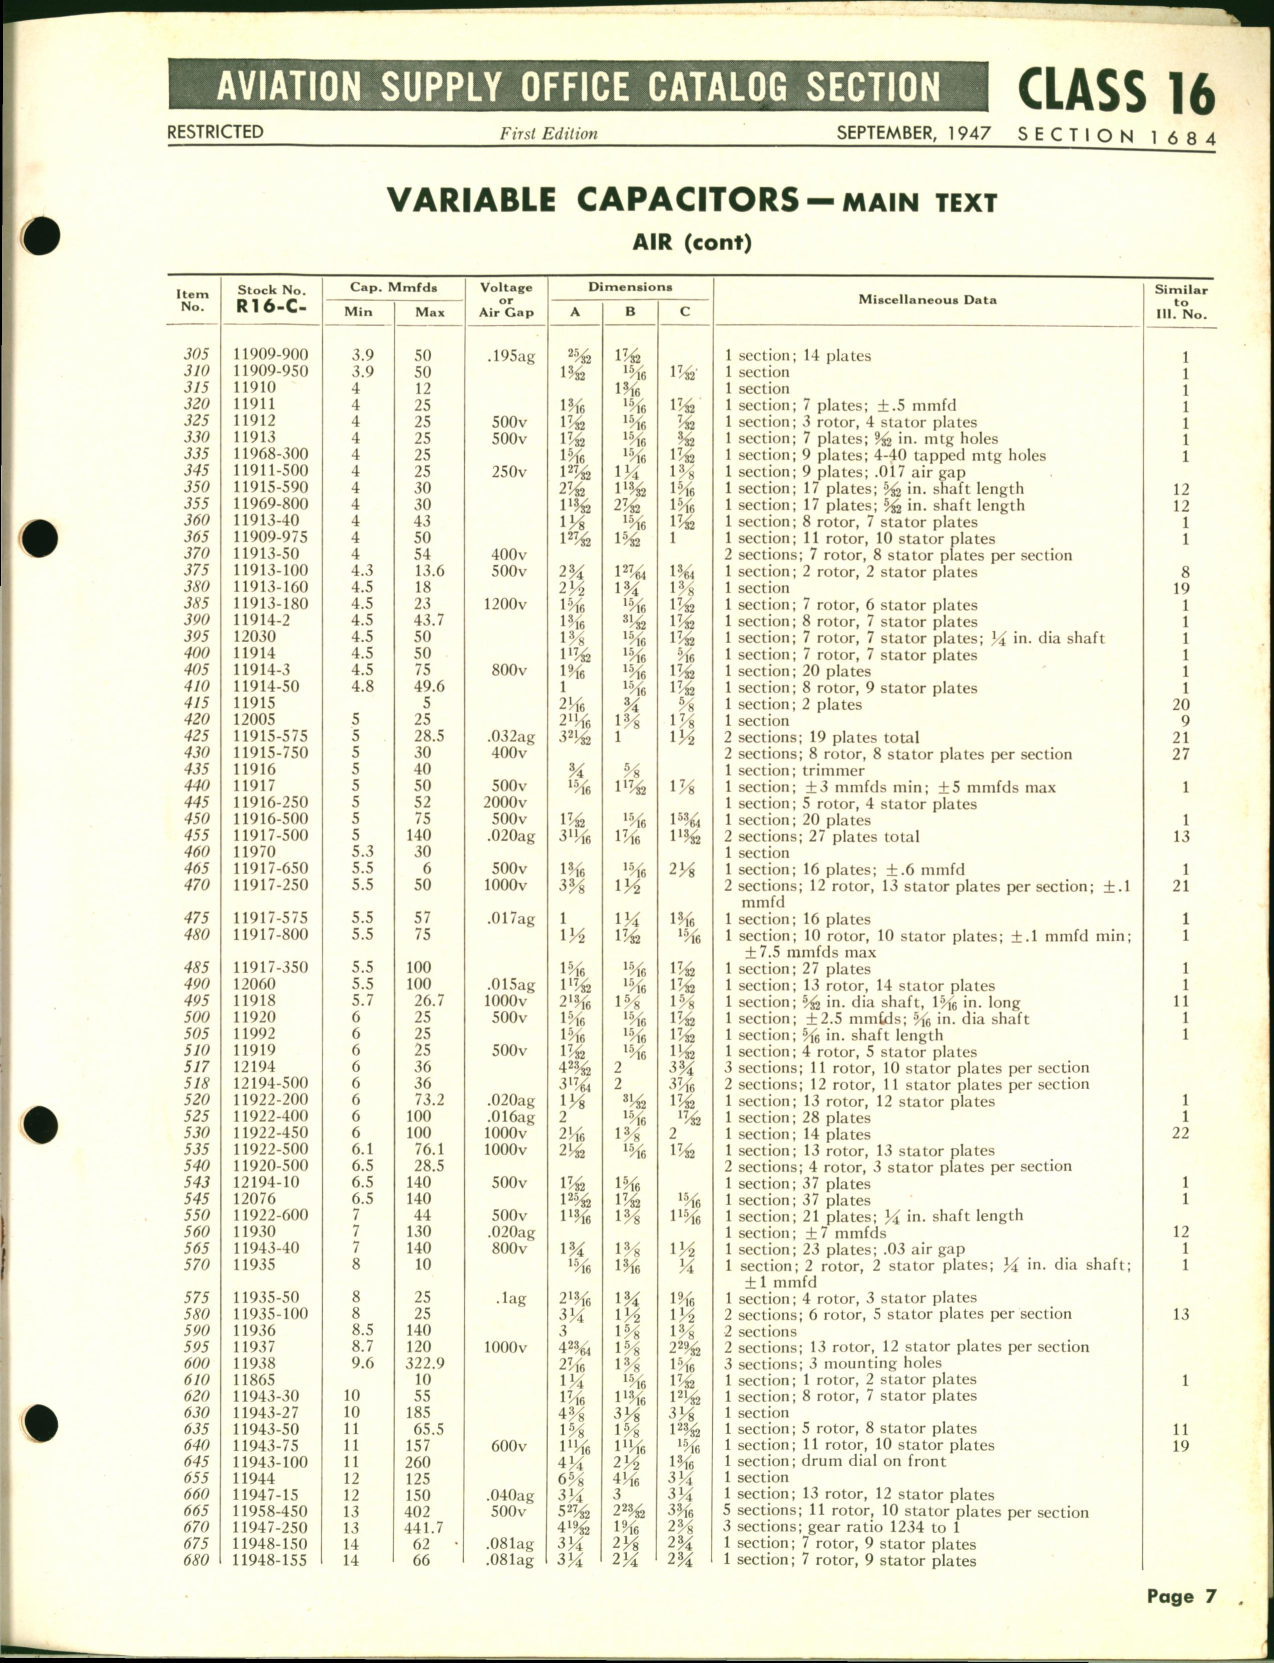 Sample page 7 from AirCorps Library document: Variable Capacitors